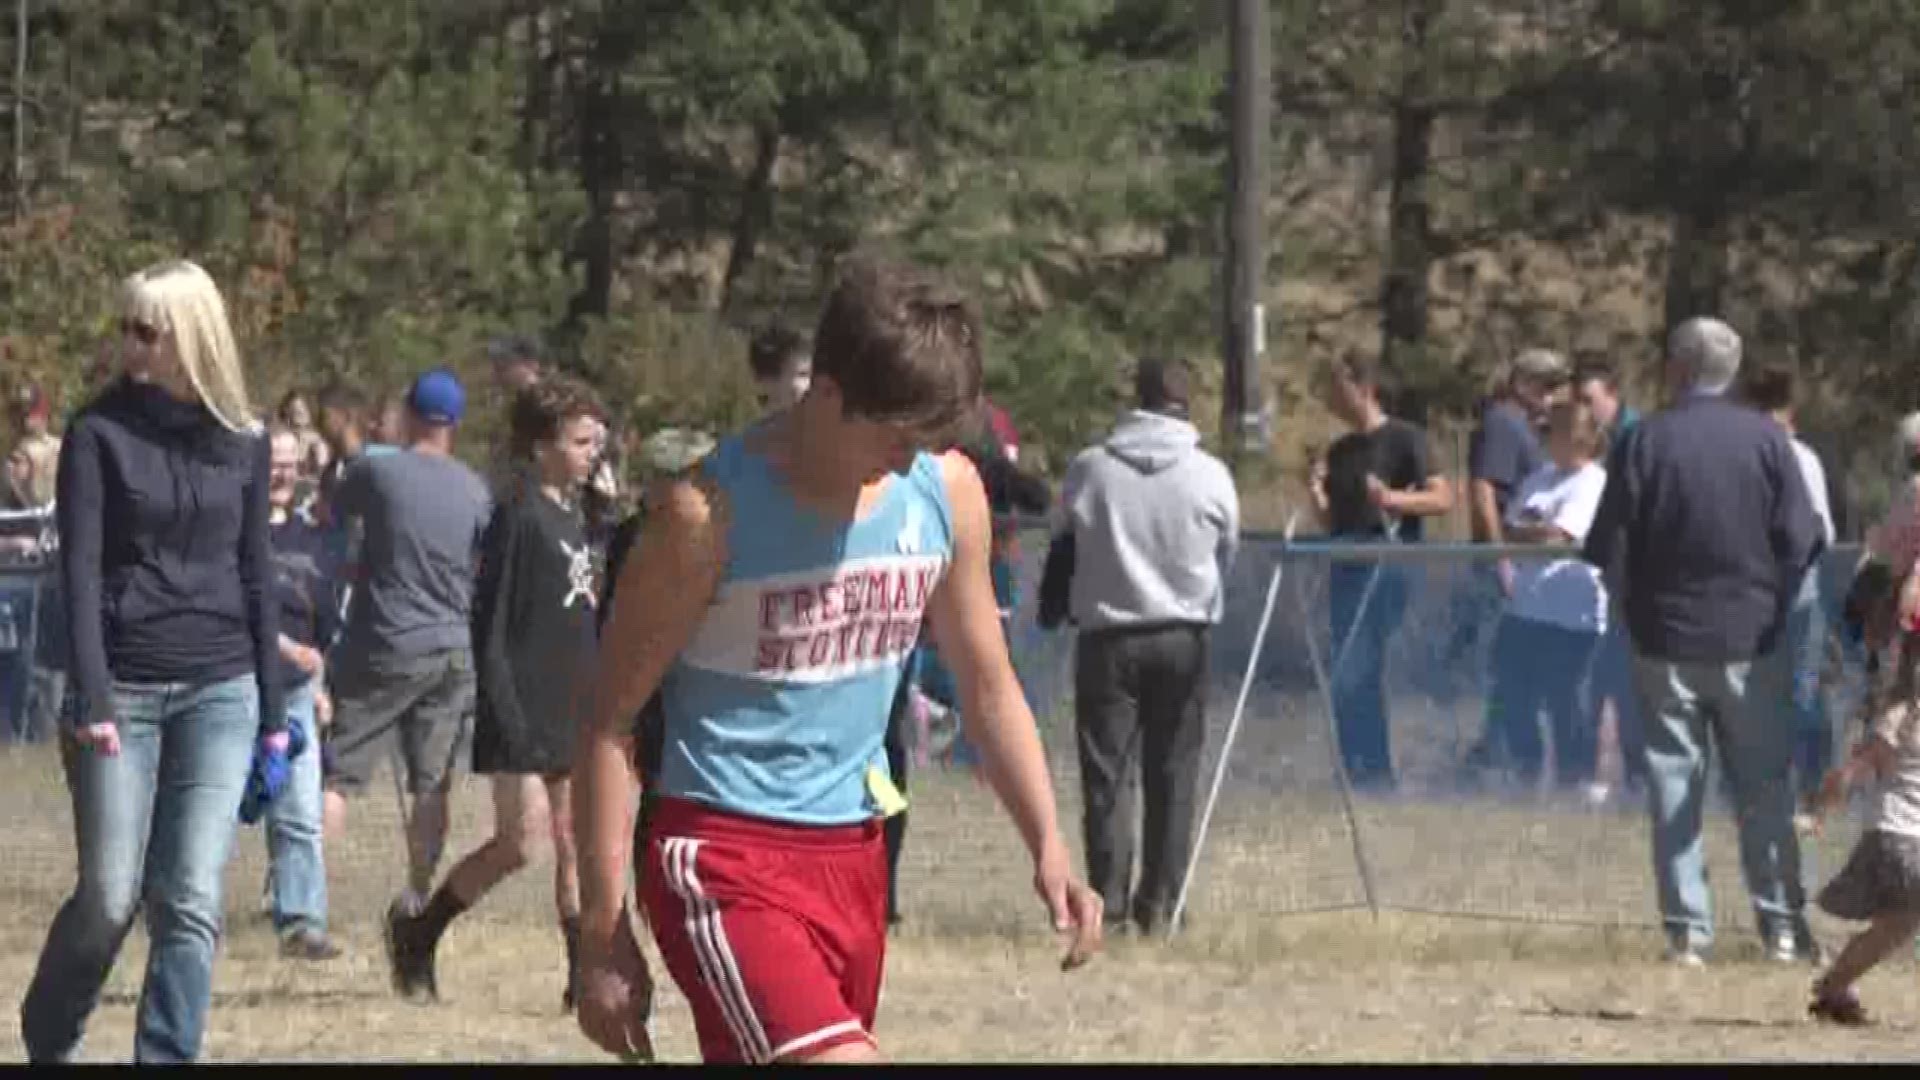 KREM 2's Evan Noorani goes to a cross country meet to talk to the lone Freeman High School competitor about why he decided to run.